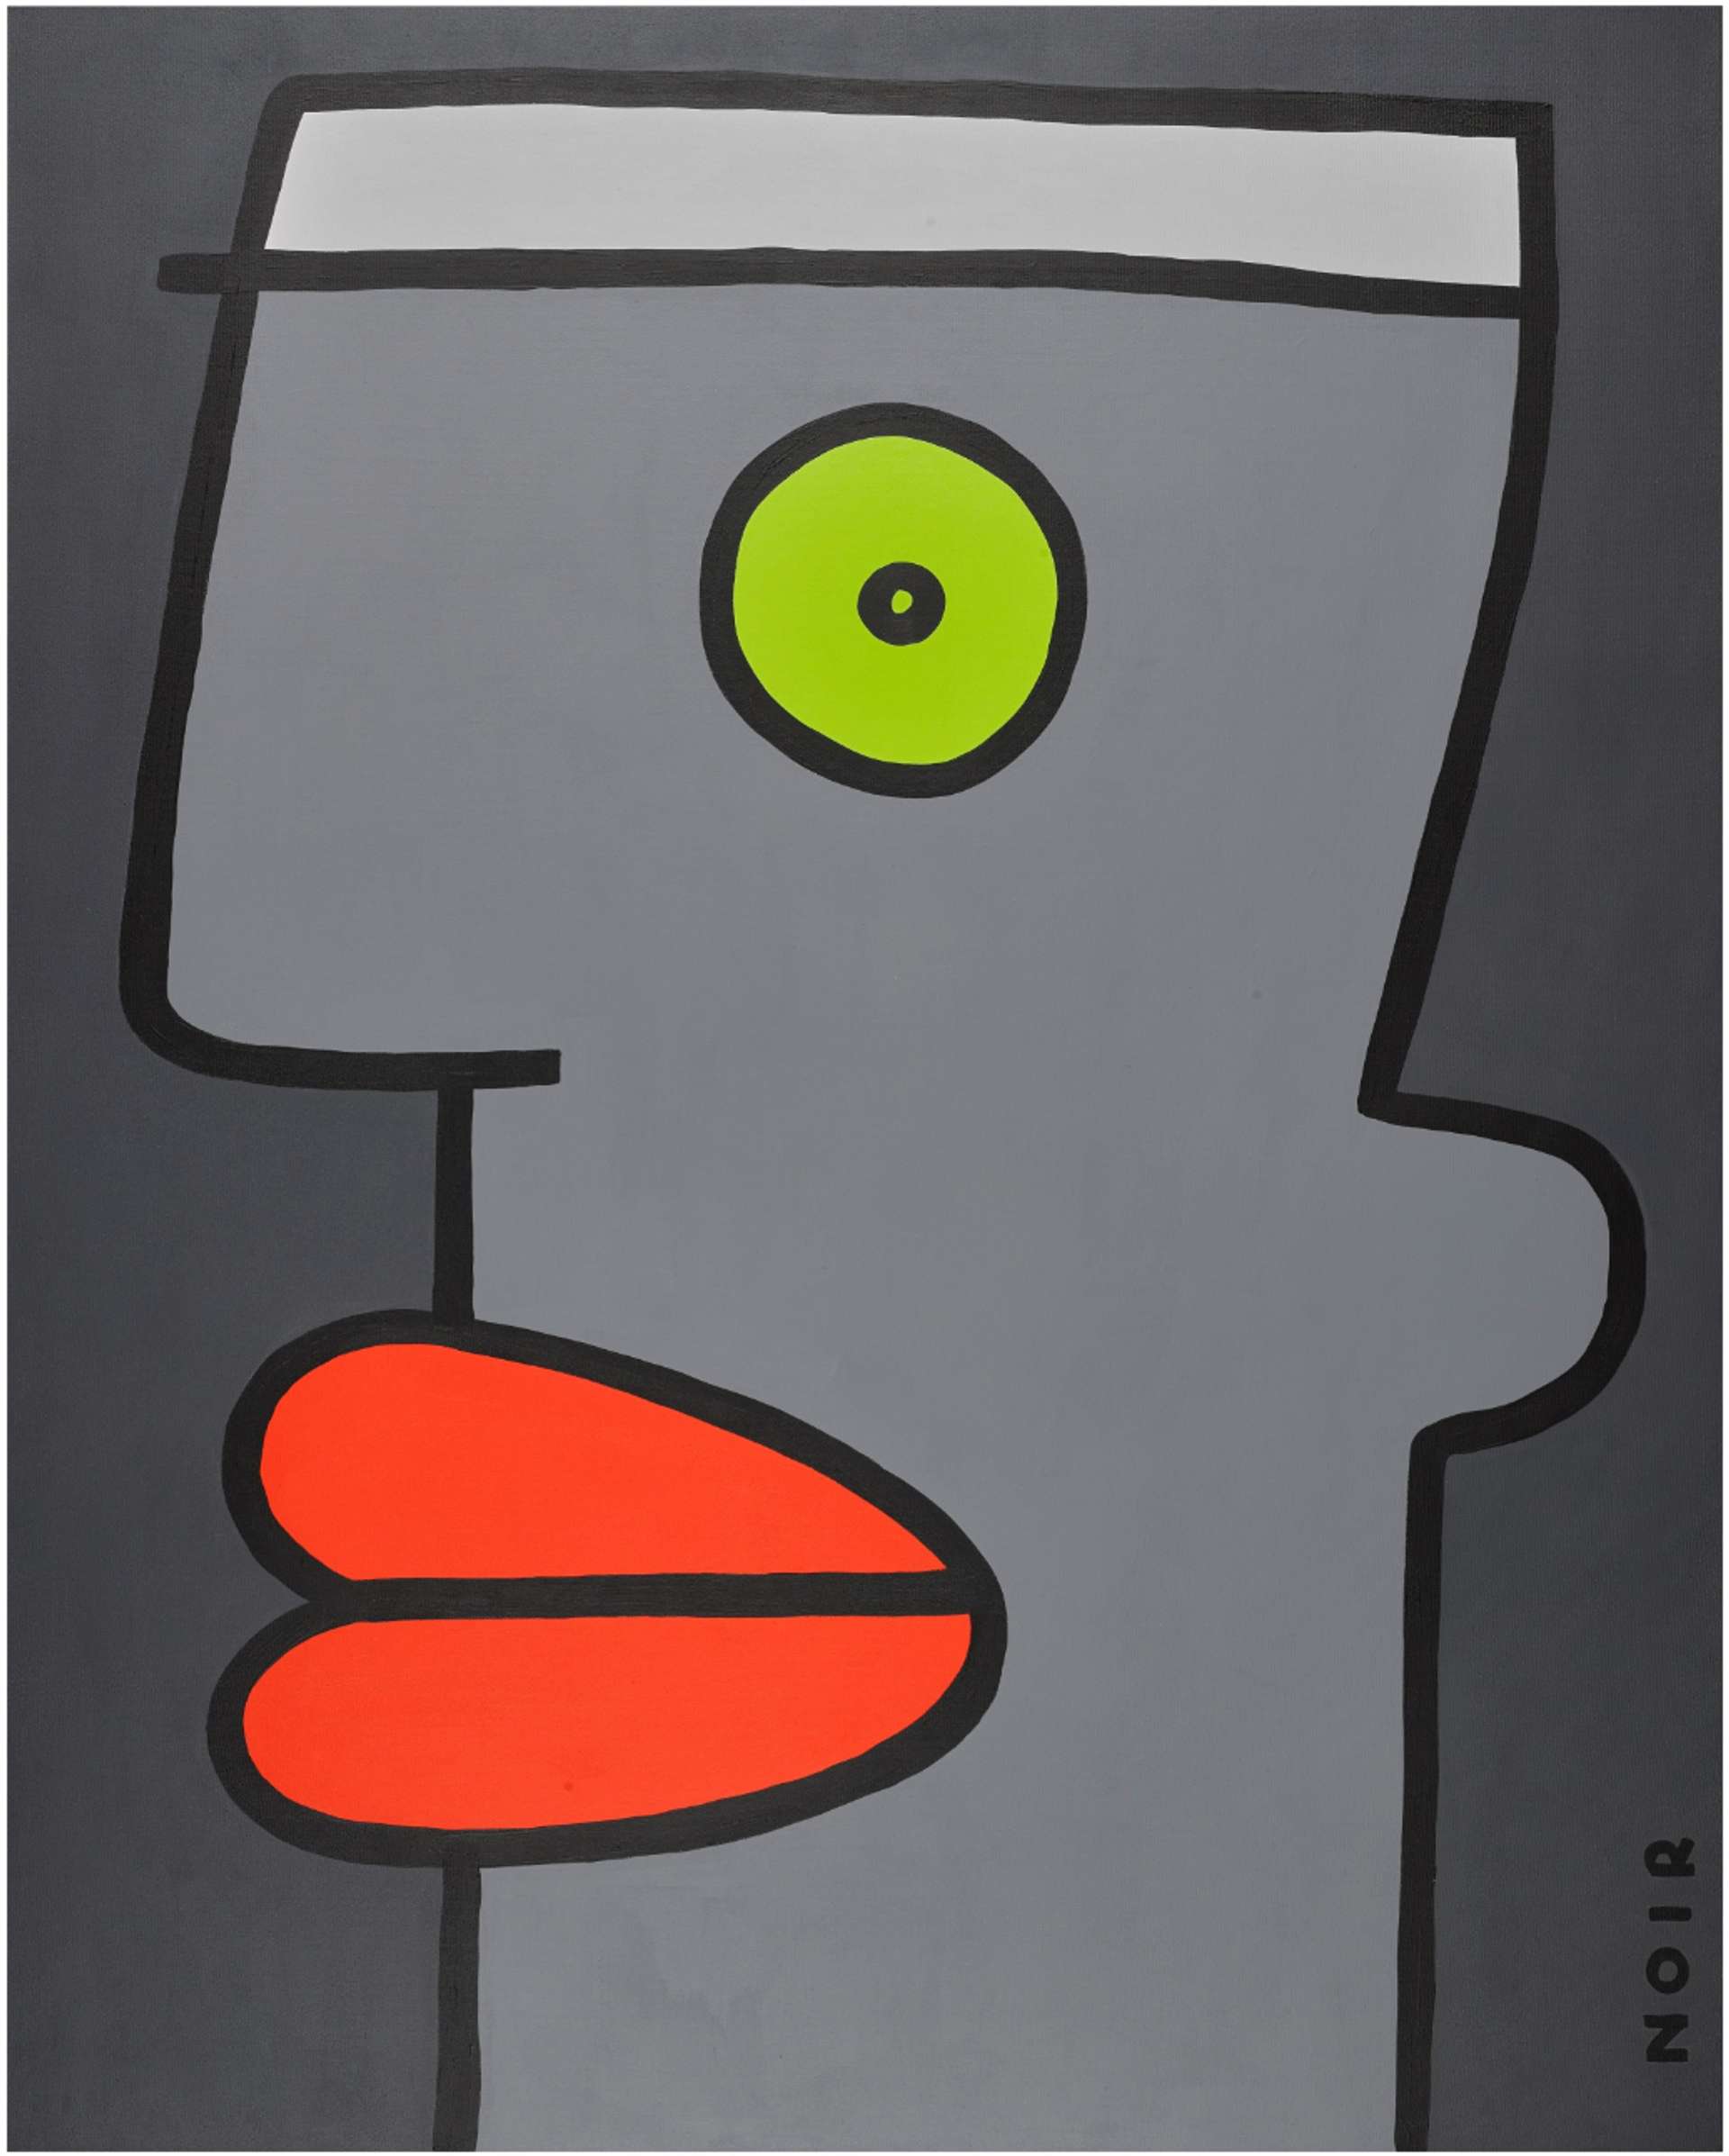 An abstract canvas with shades of grey, vibrant red, and green. A bold black-lined caricature in a side profile is drawn over the colors. The green forms the eye, red creates exaggerated lips, and a lighter grey hue resembles a hat. The artwork is signed "NOIR" in the bottom left corner.